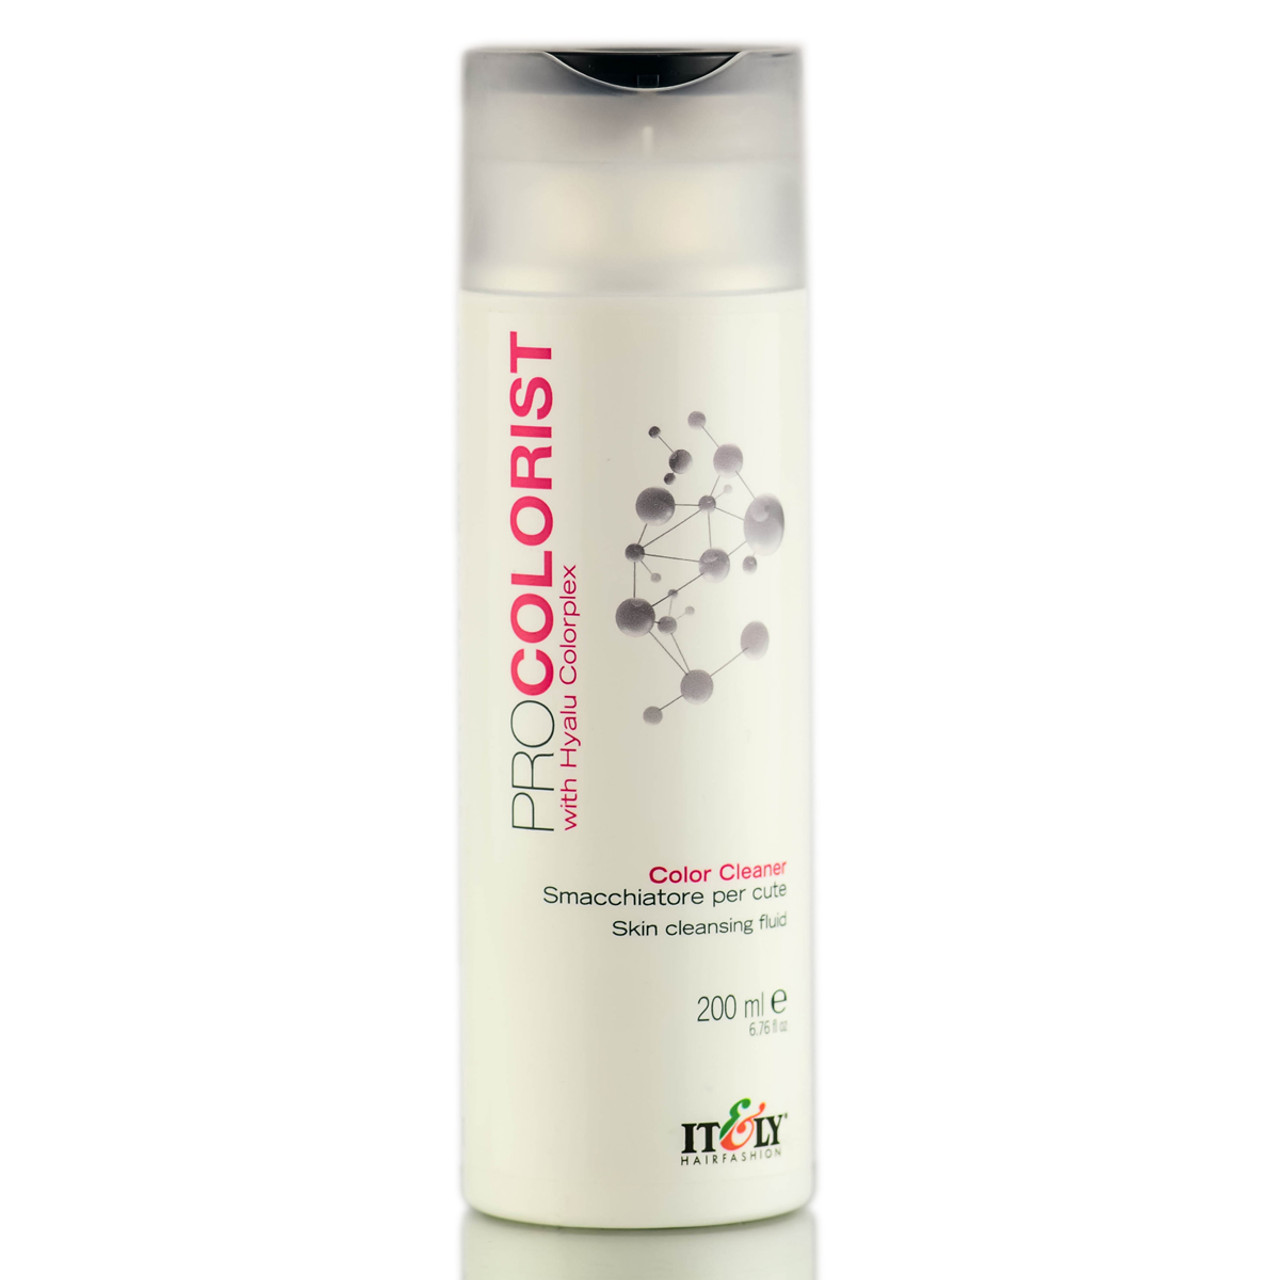 Itandly Hair Fashion Procolorist Color Cleaner 